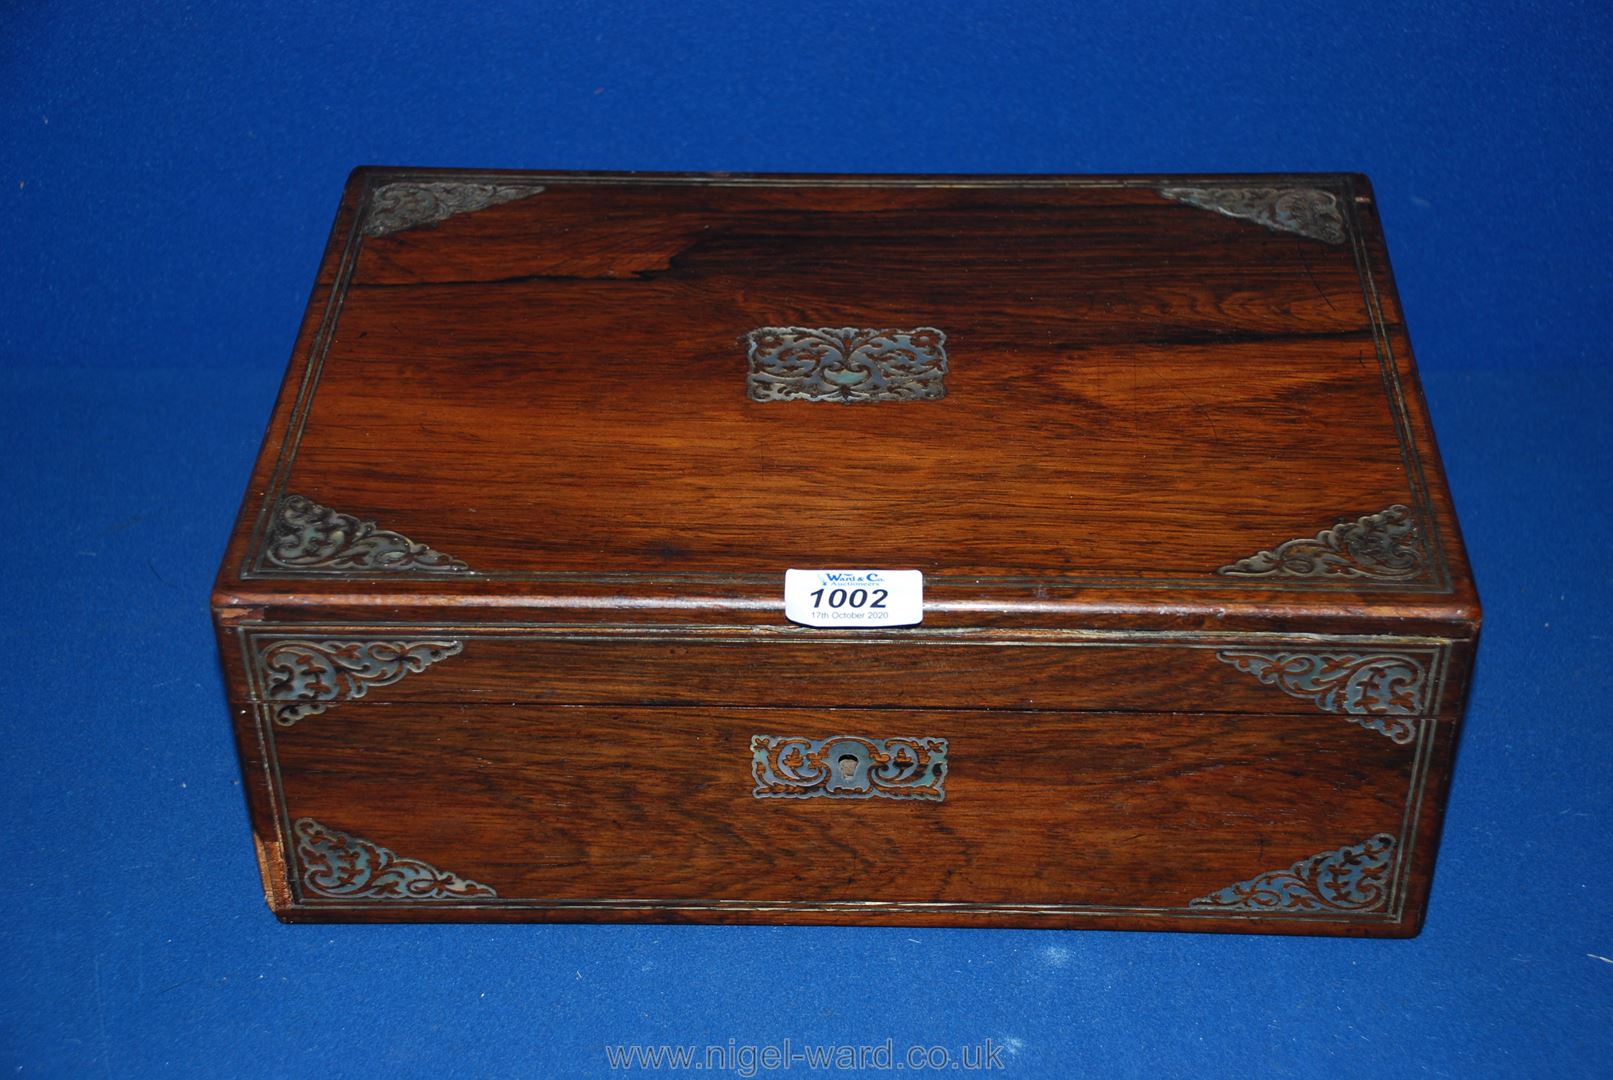 A wooden stationary box with Mother of Pearl inlay, made by Mechi of London.